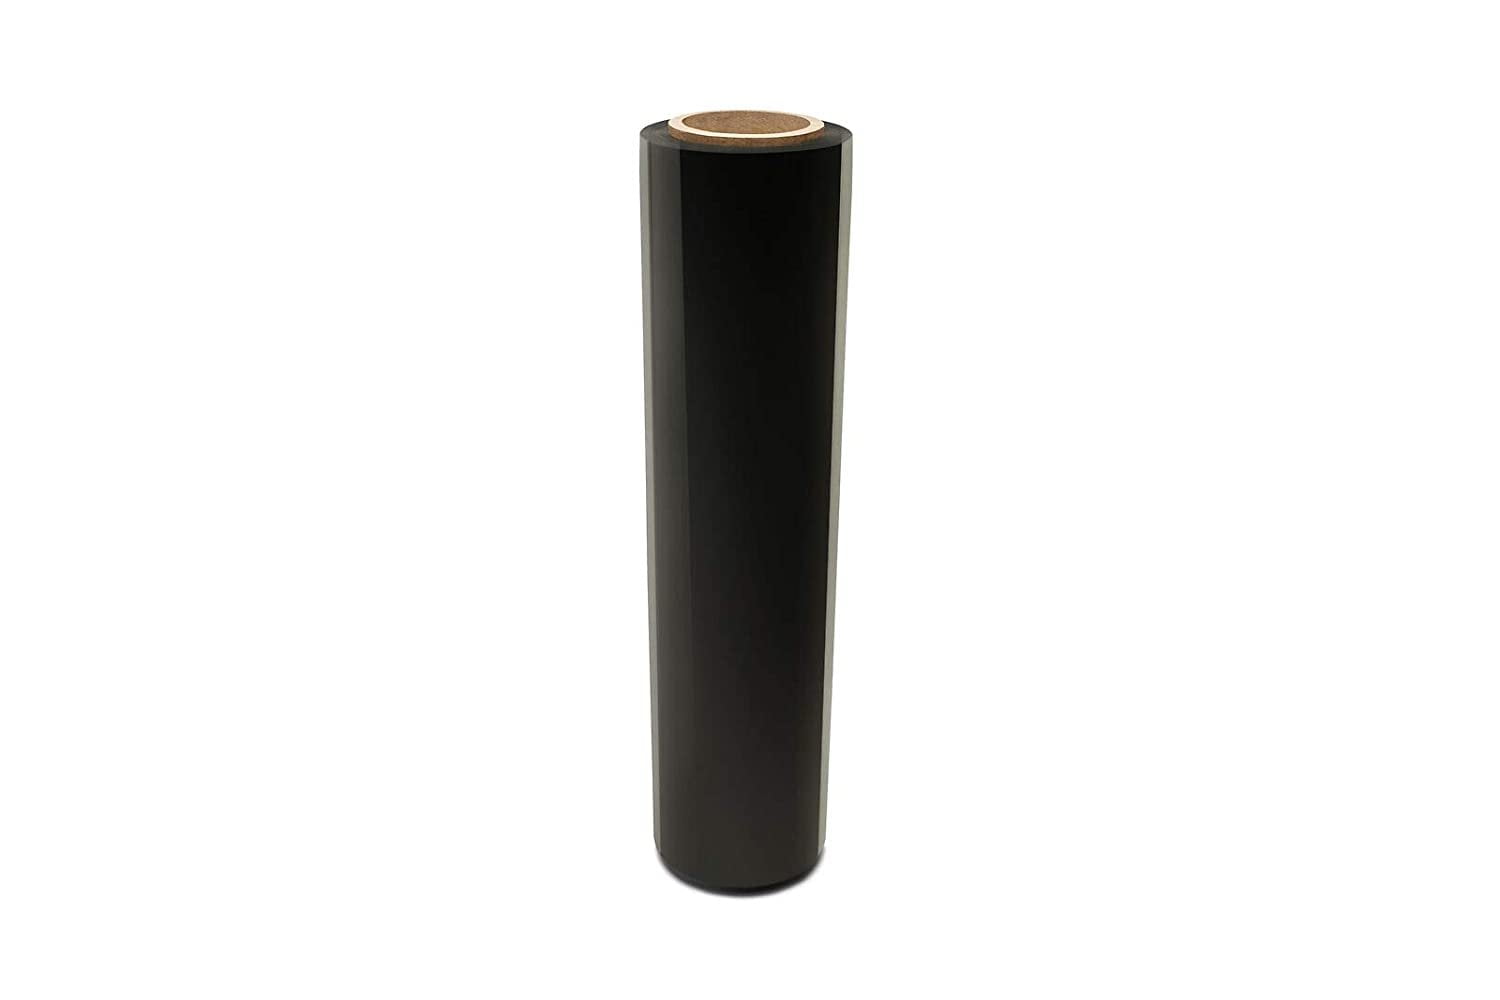  UBOXES Foam Wrap Roll 150' x 12 Inch Wide 1/16 Inch Thick  Perforated 12 Inch, Model:FOAMWRAPS150 : Office Products